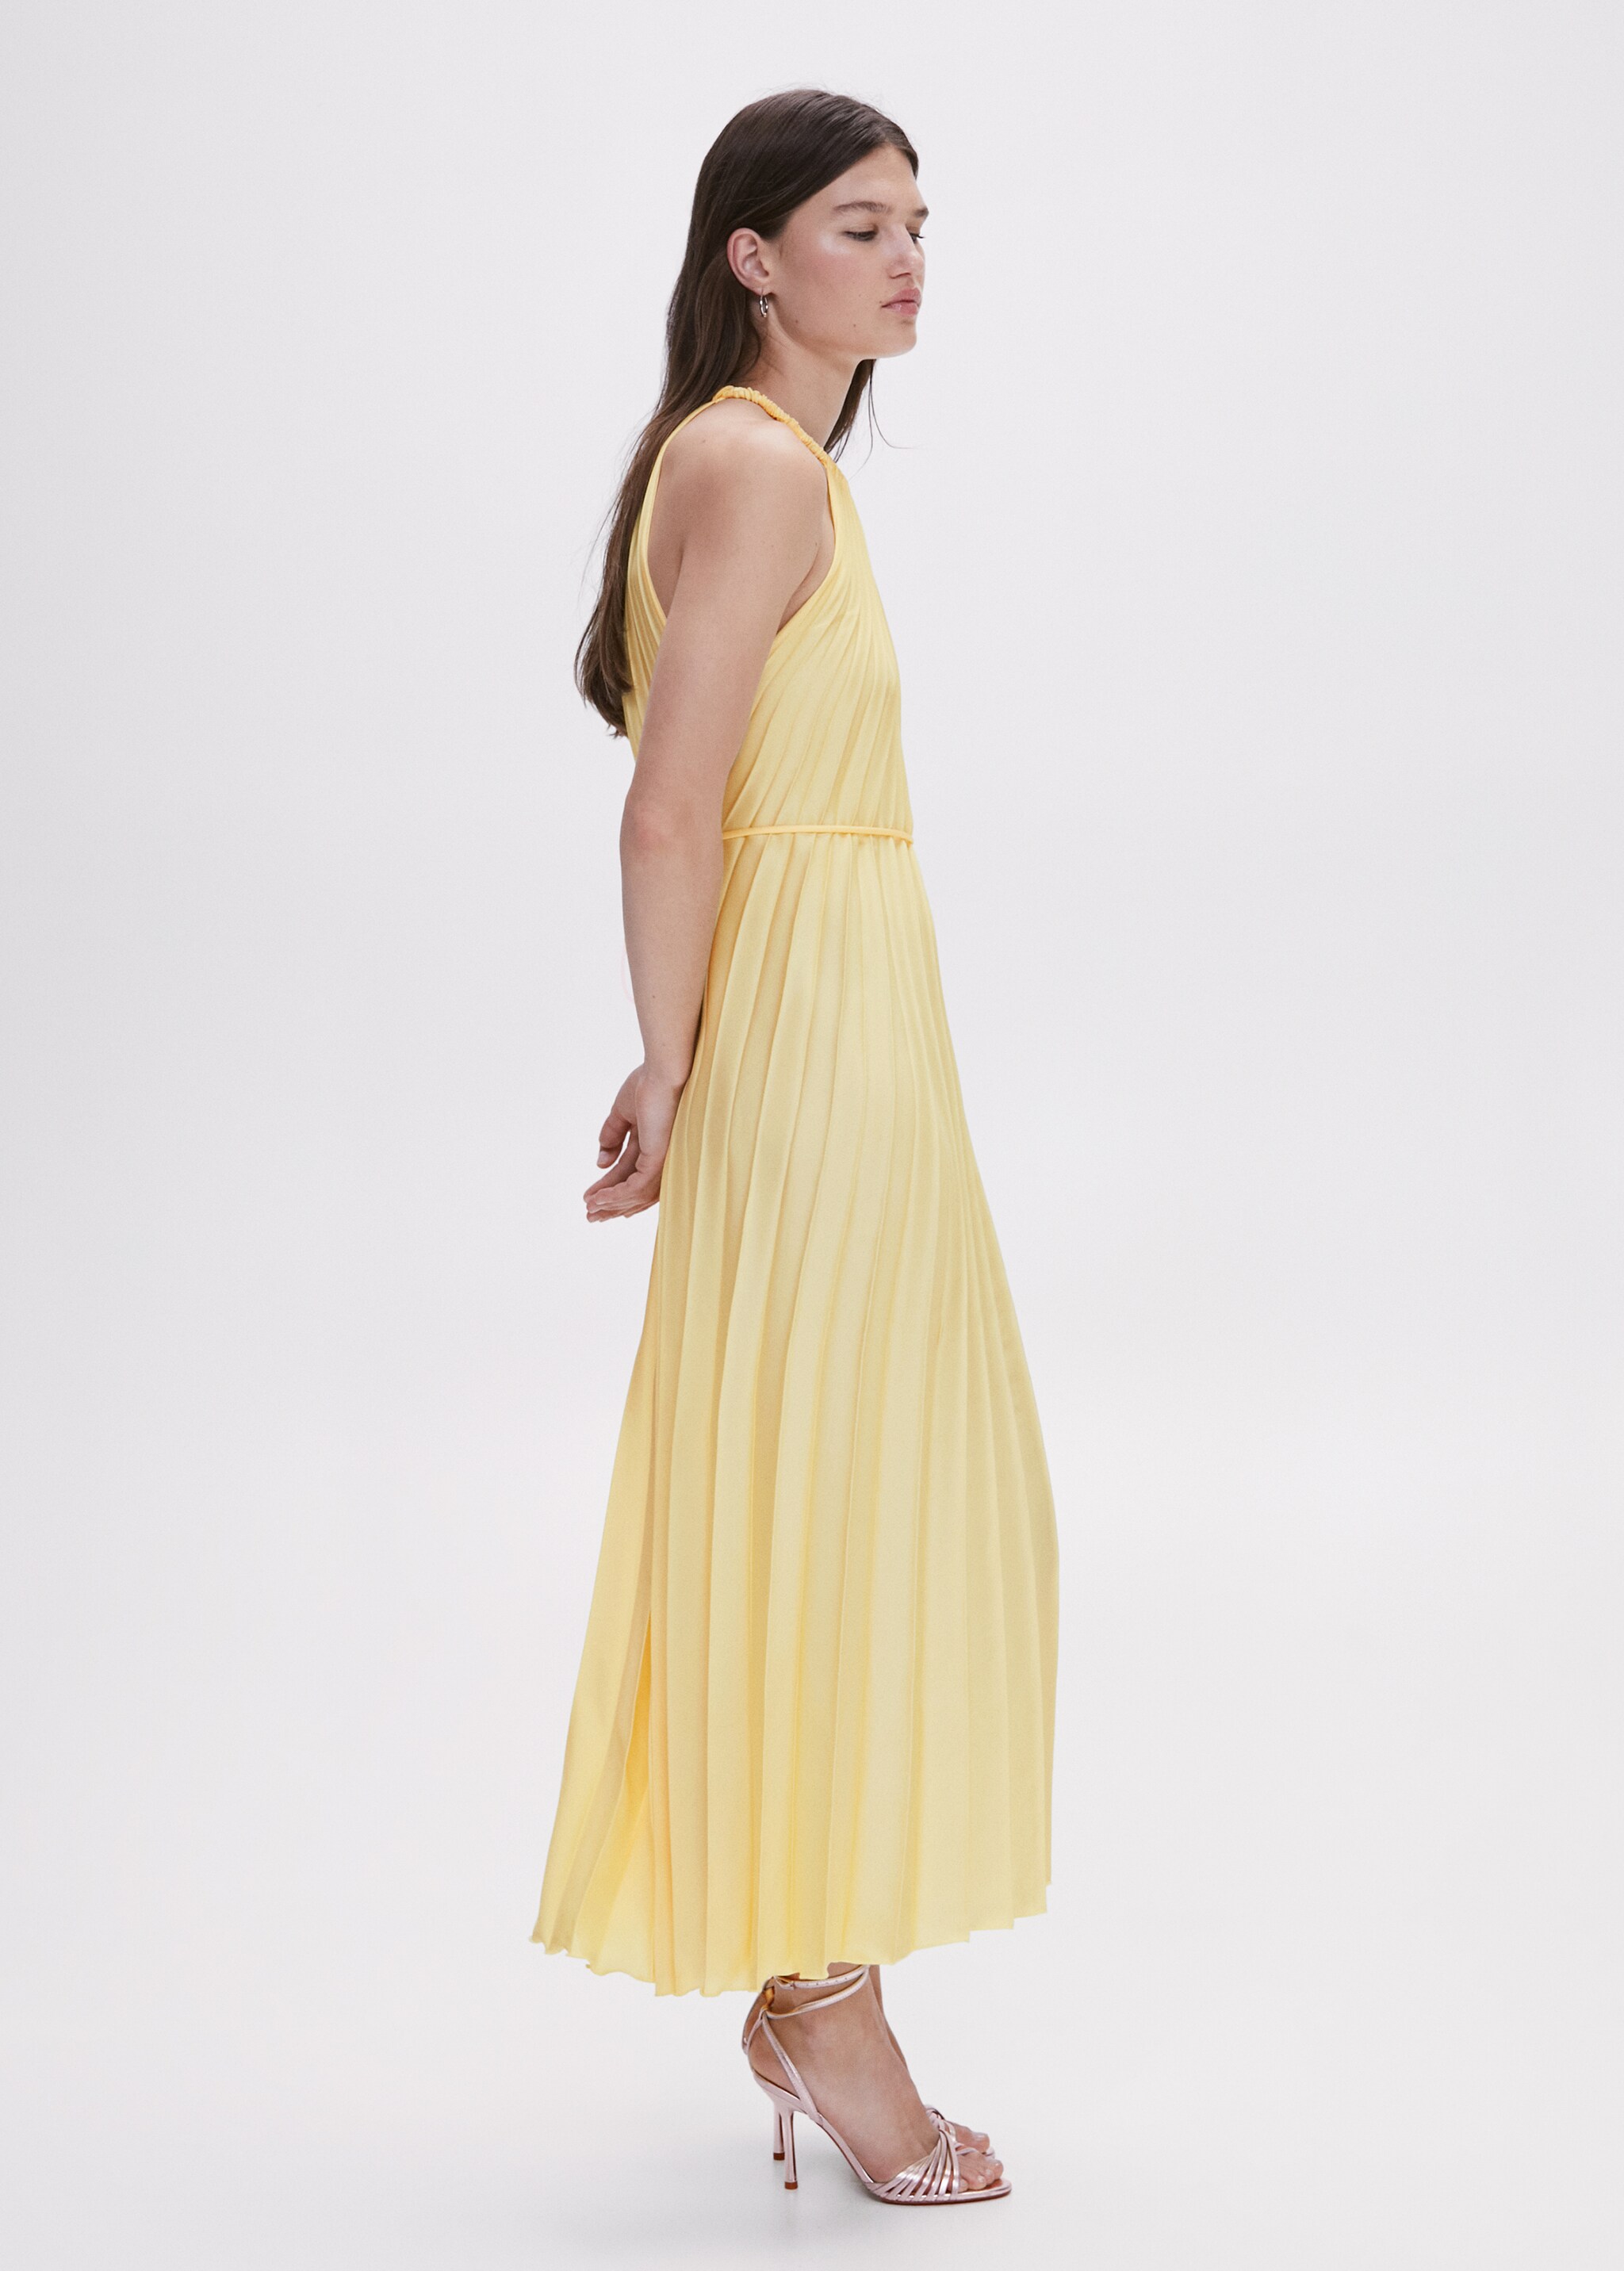 Pleated halter neck dress - Details of the article 4